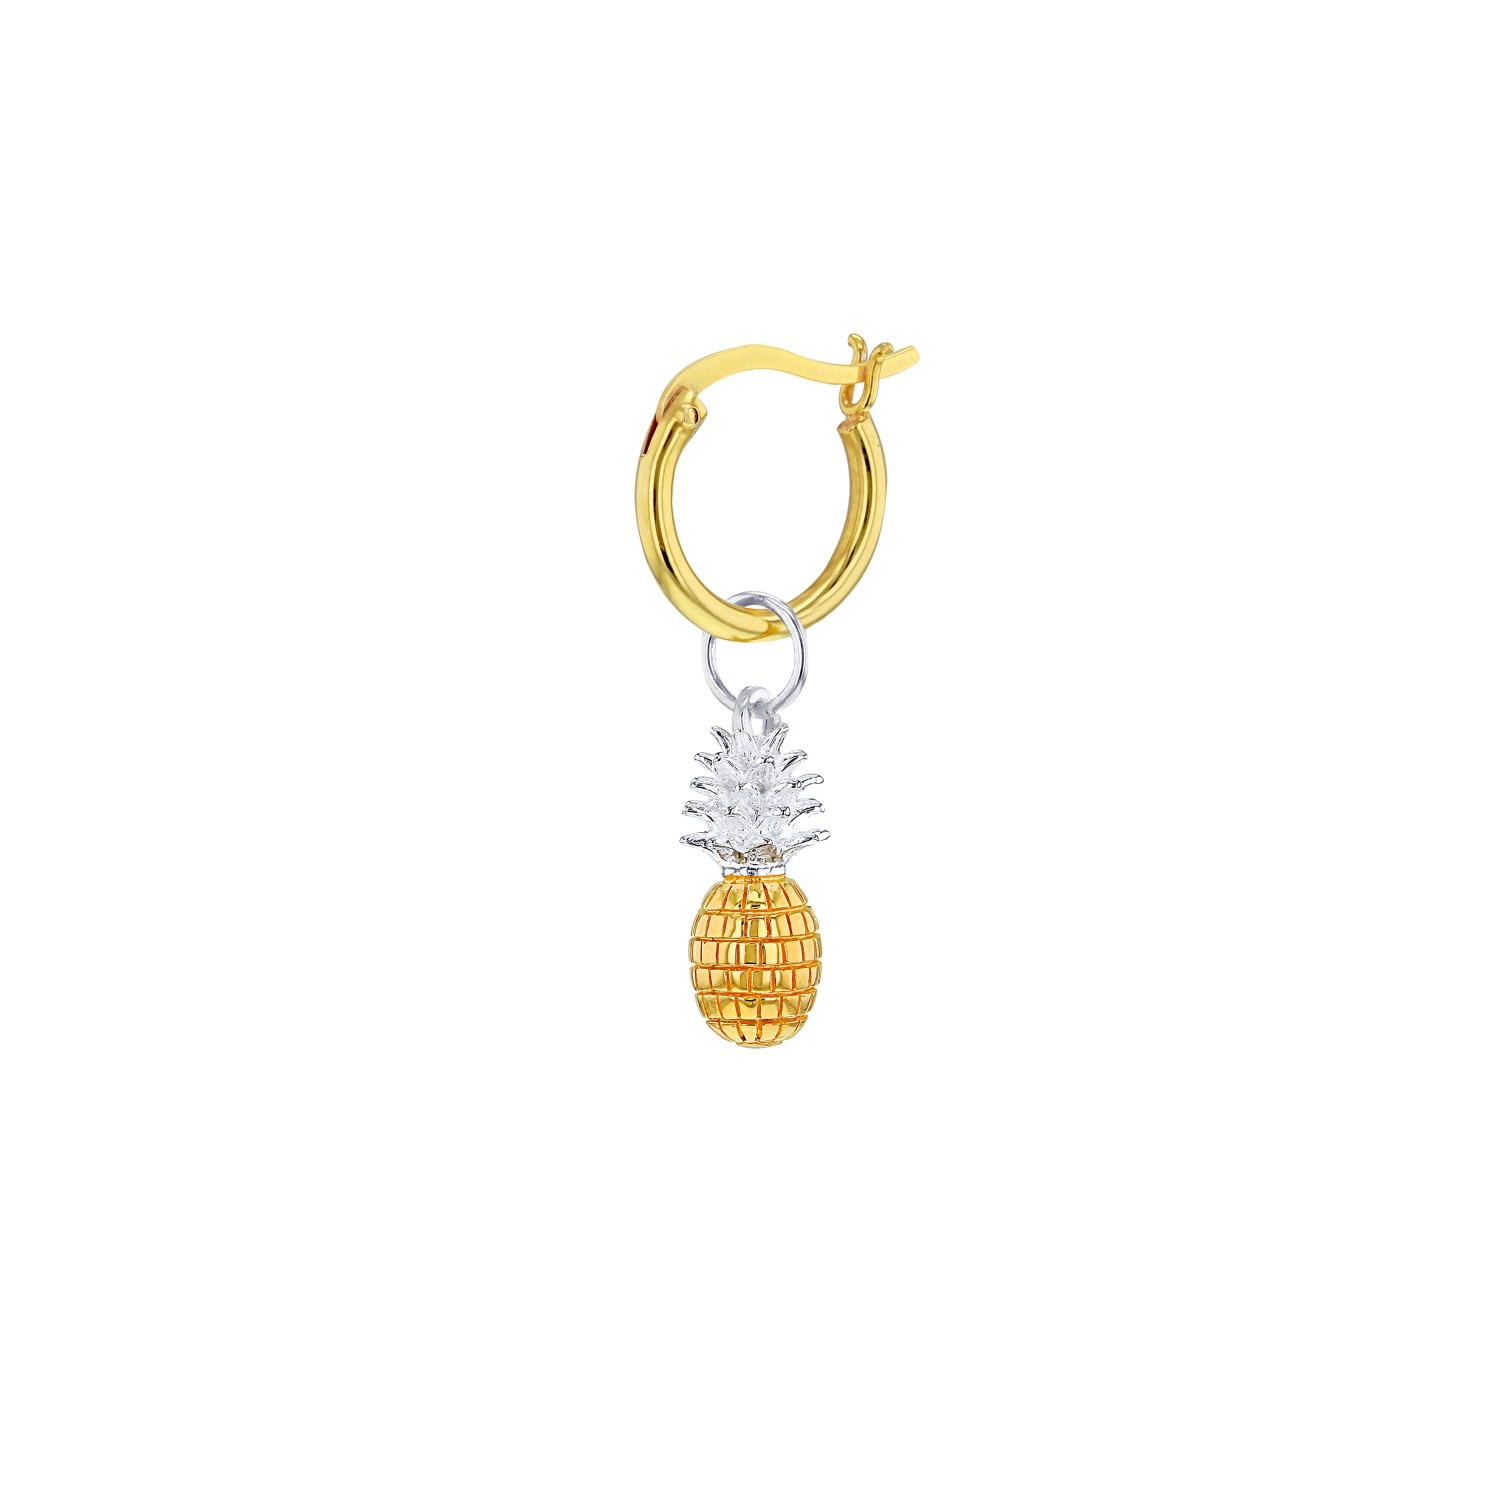 True Rocks Men's Gold / Silver 2 Tone Sterling Silver & 18kt Gold Plated Mini Pineapple Charm On Gold Hoop